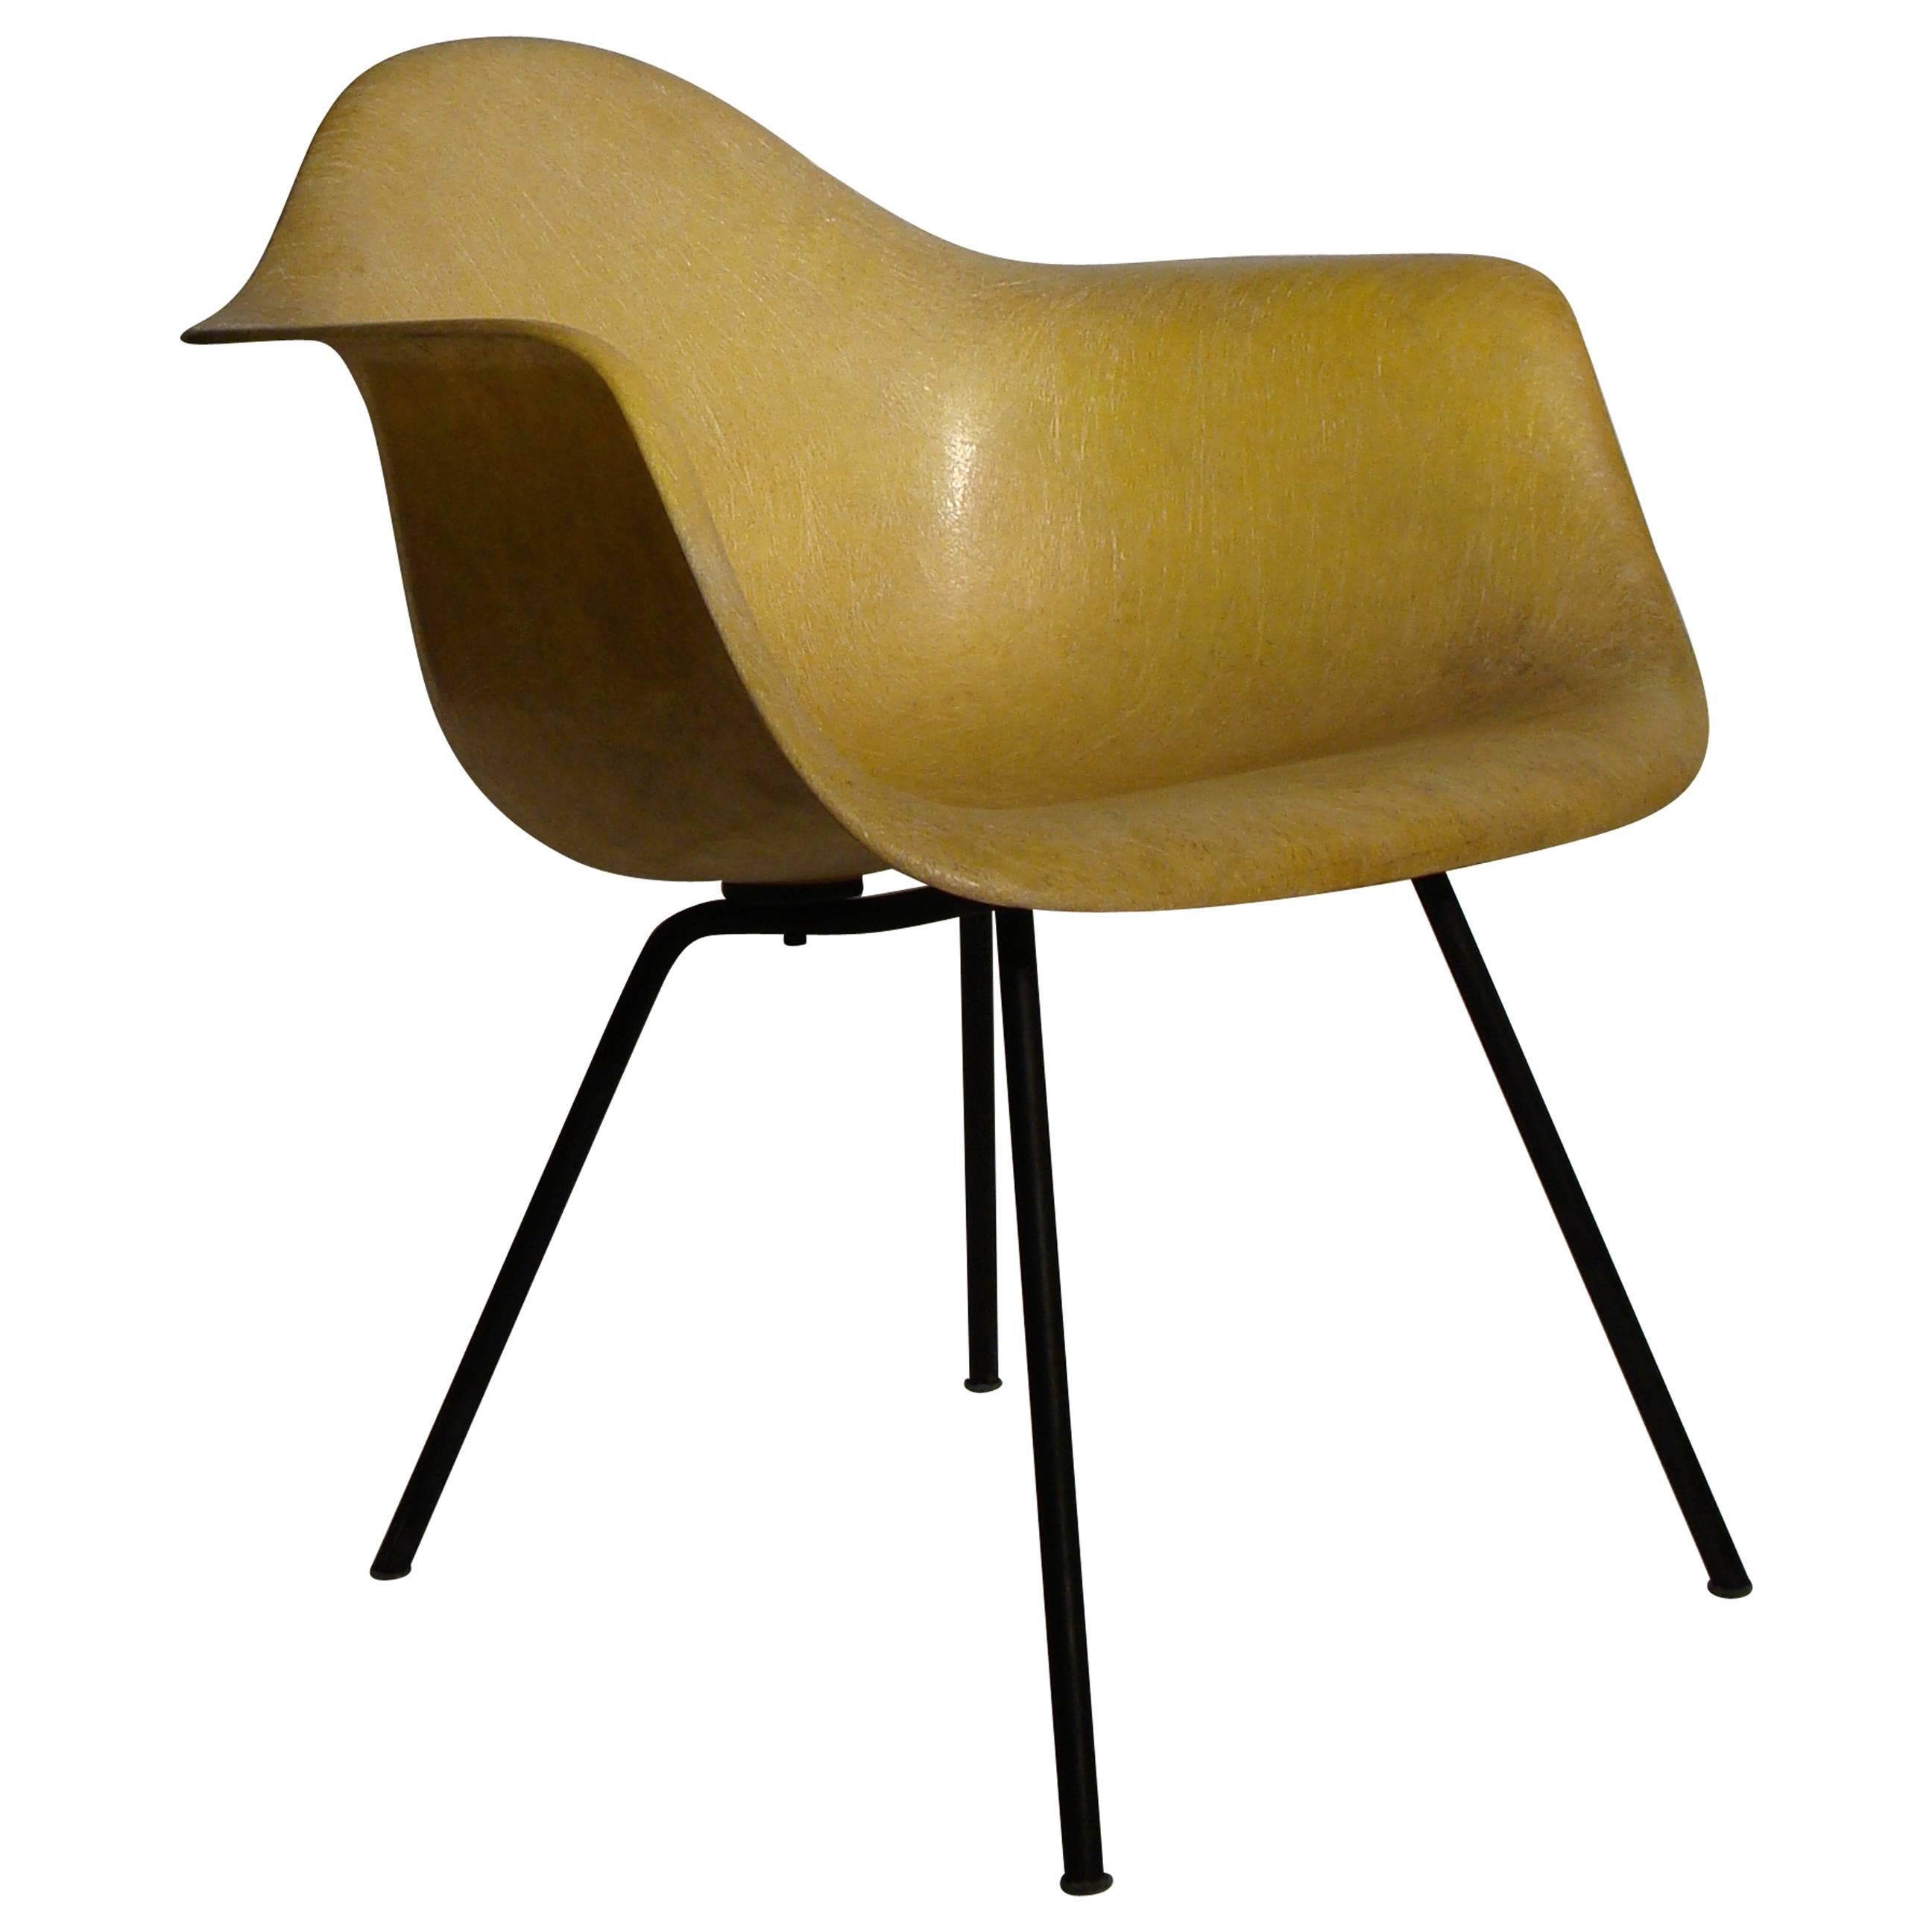 Early Zenith Rope Edge Lax Eames "X" Base Chair For Sale